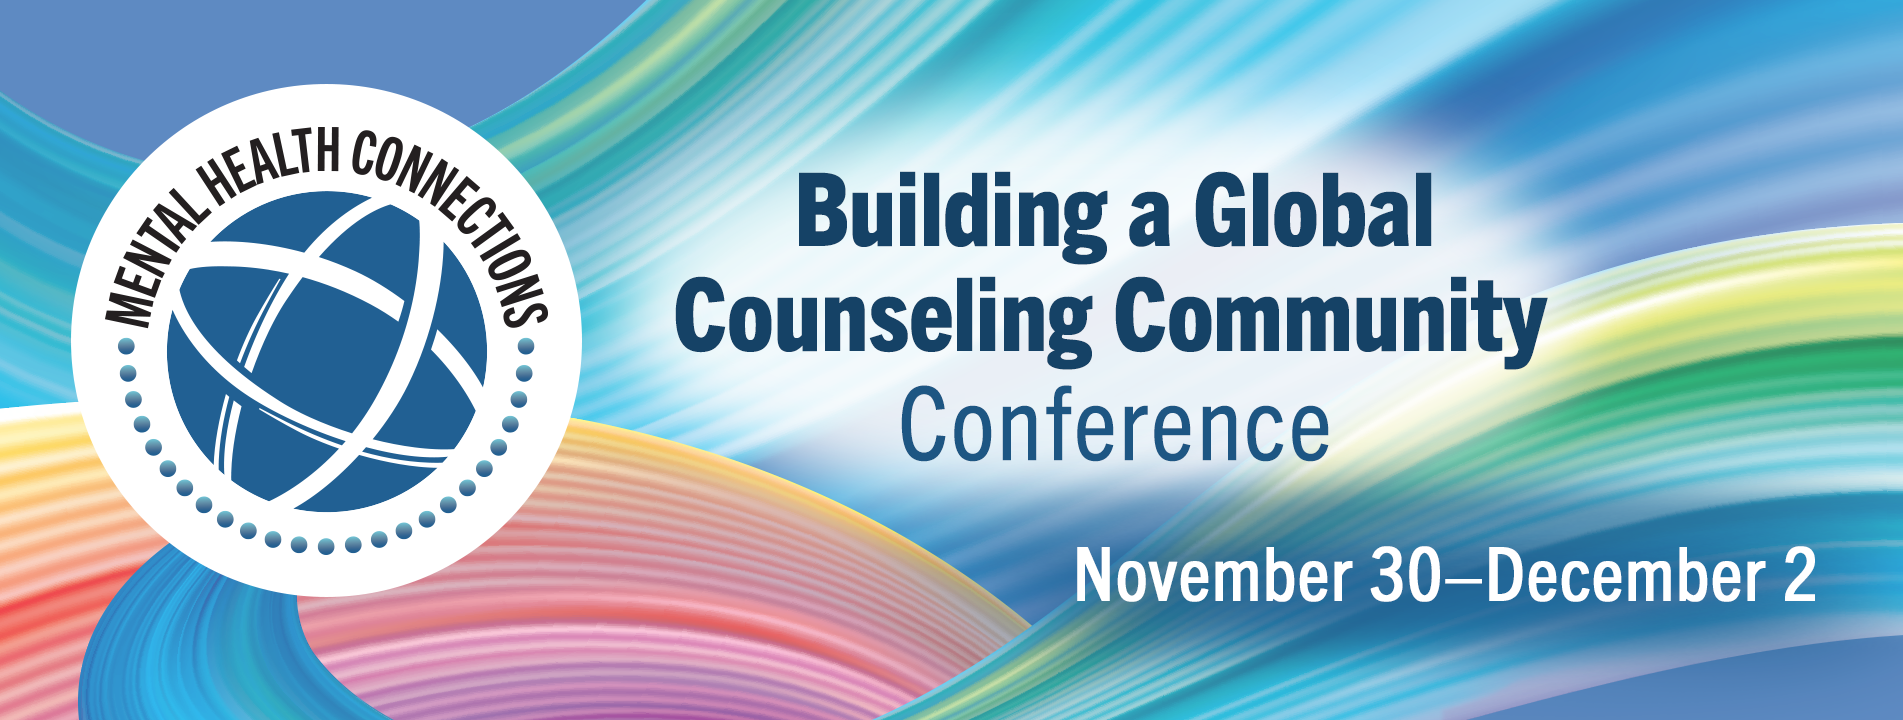 Building a Global Counseling Community Conference, November 31-December 2.